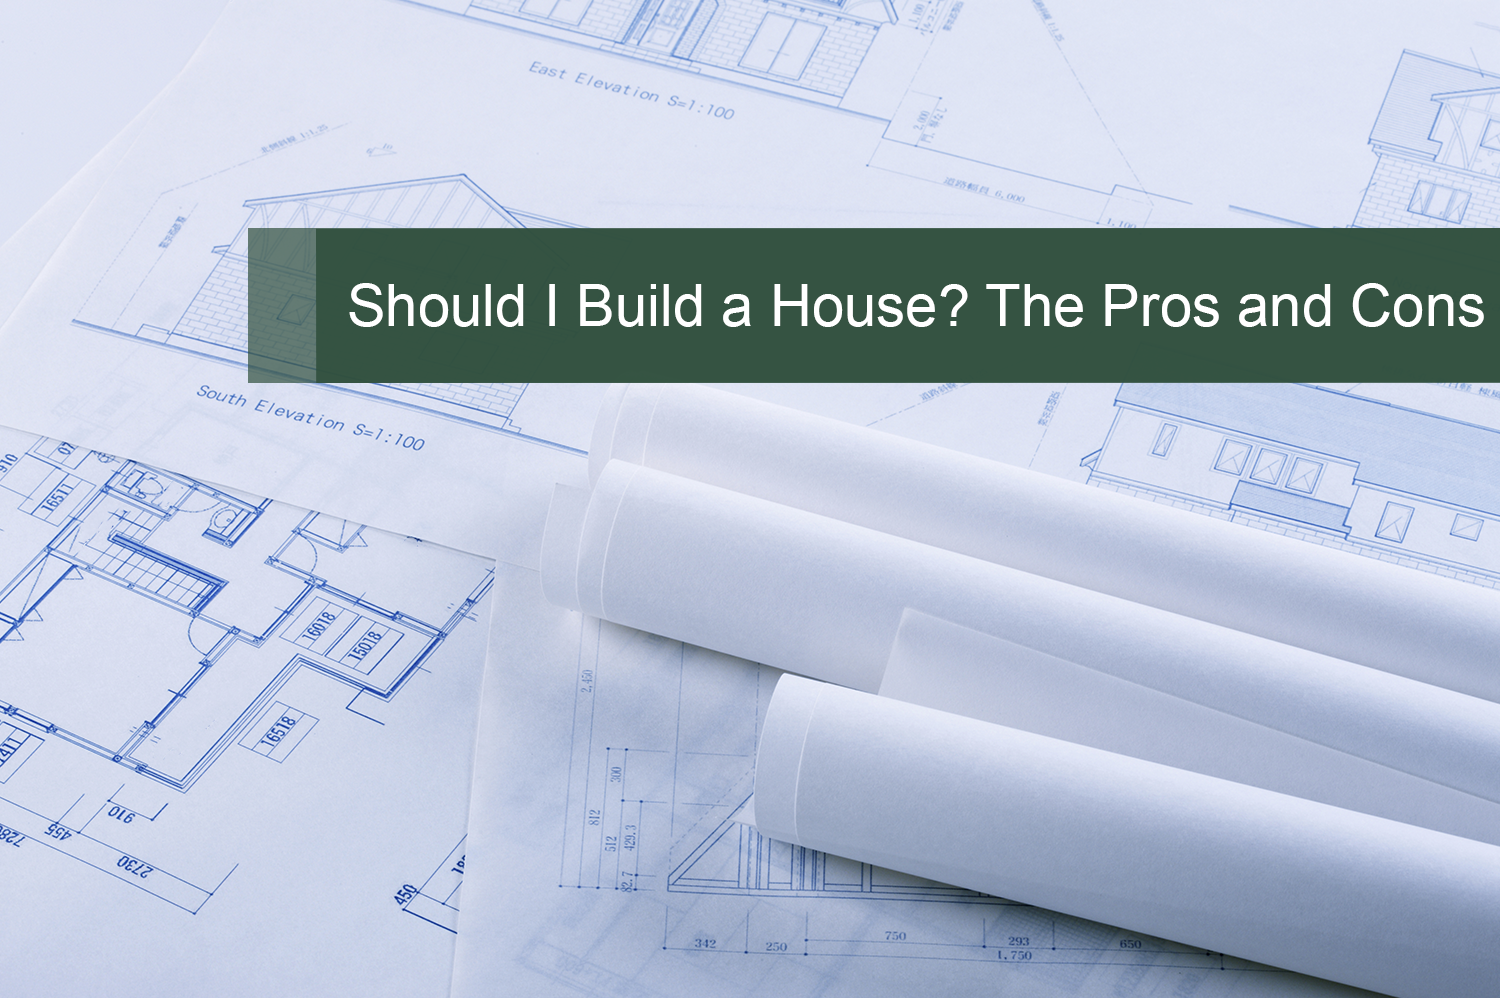 White paper drafts to build a home.